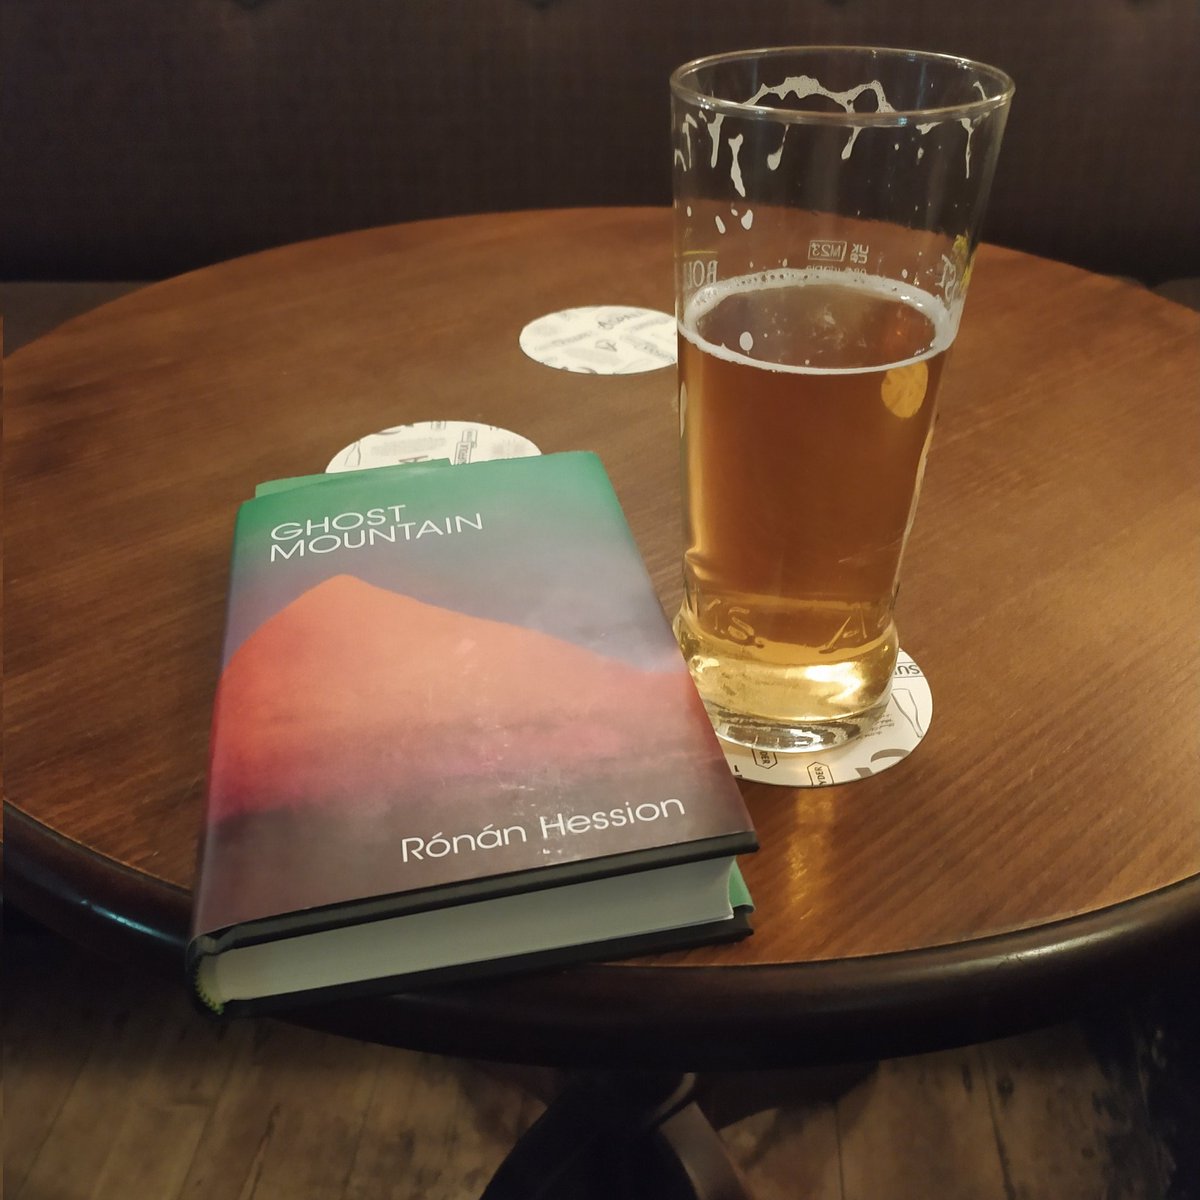 In my happy place. Saturday afternoon in the pub, a book and a pint. Bliss